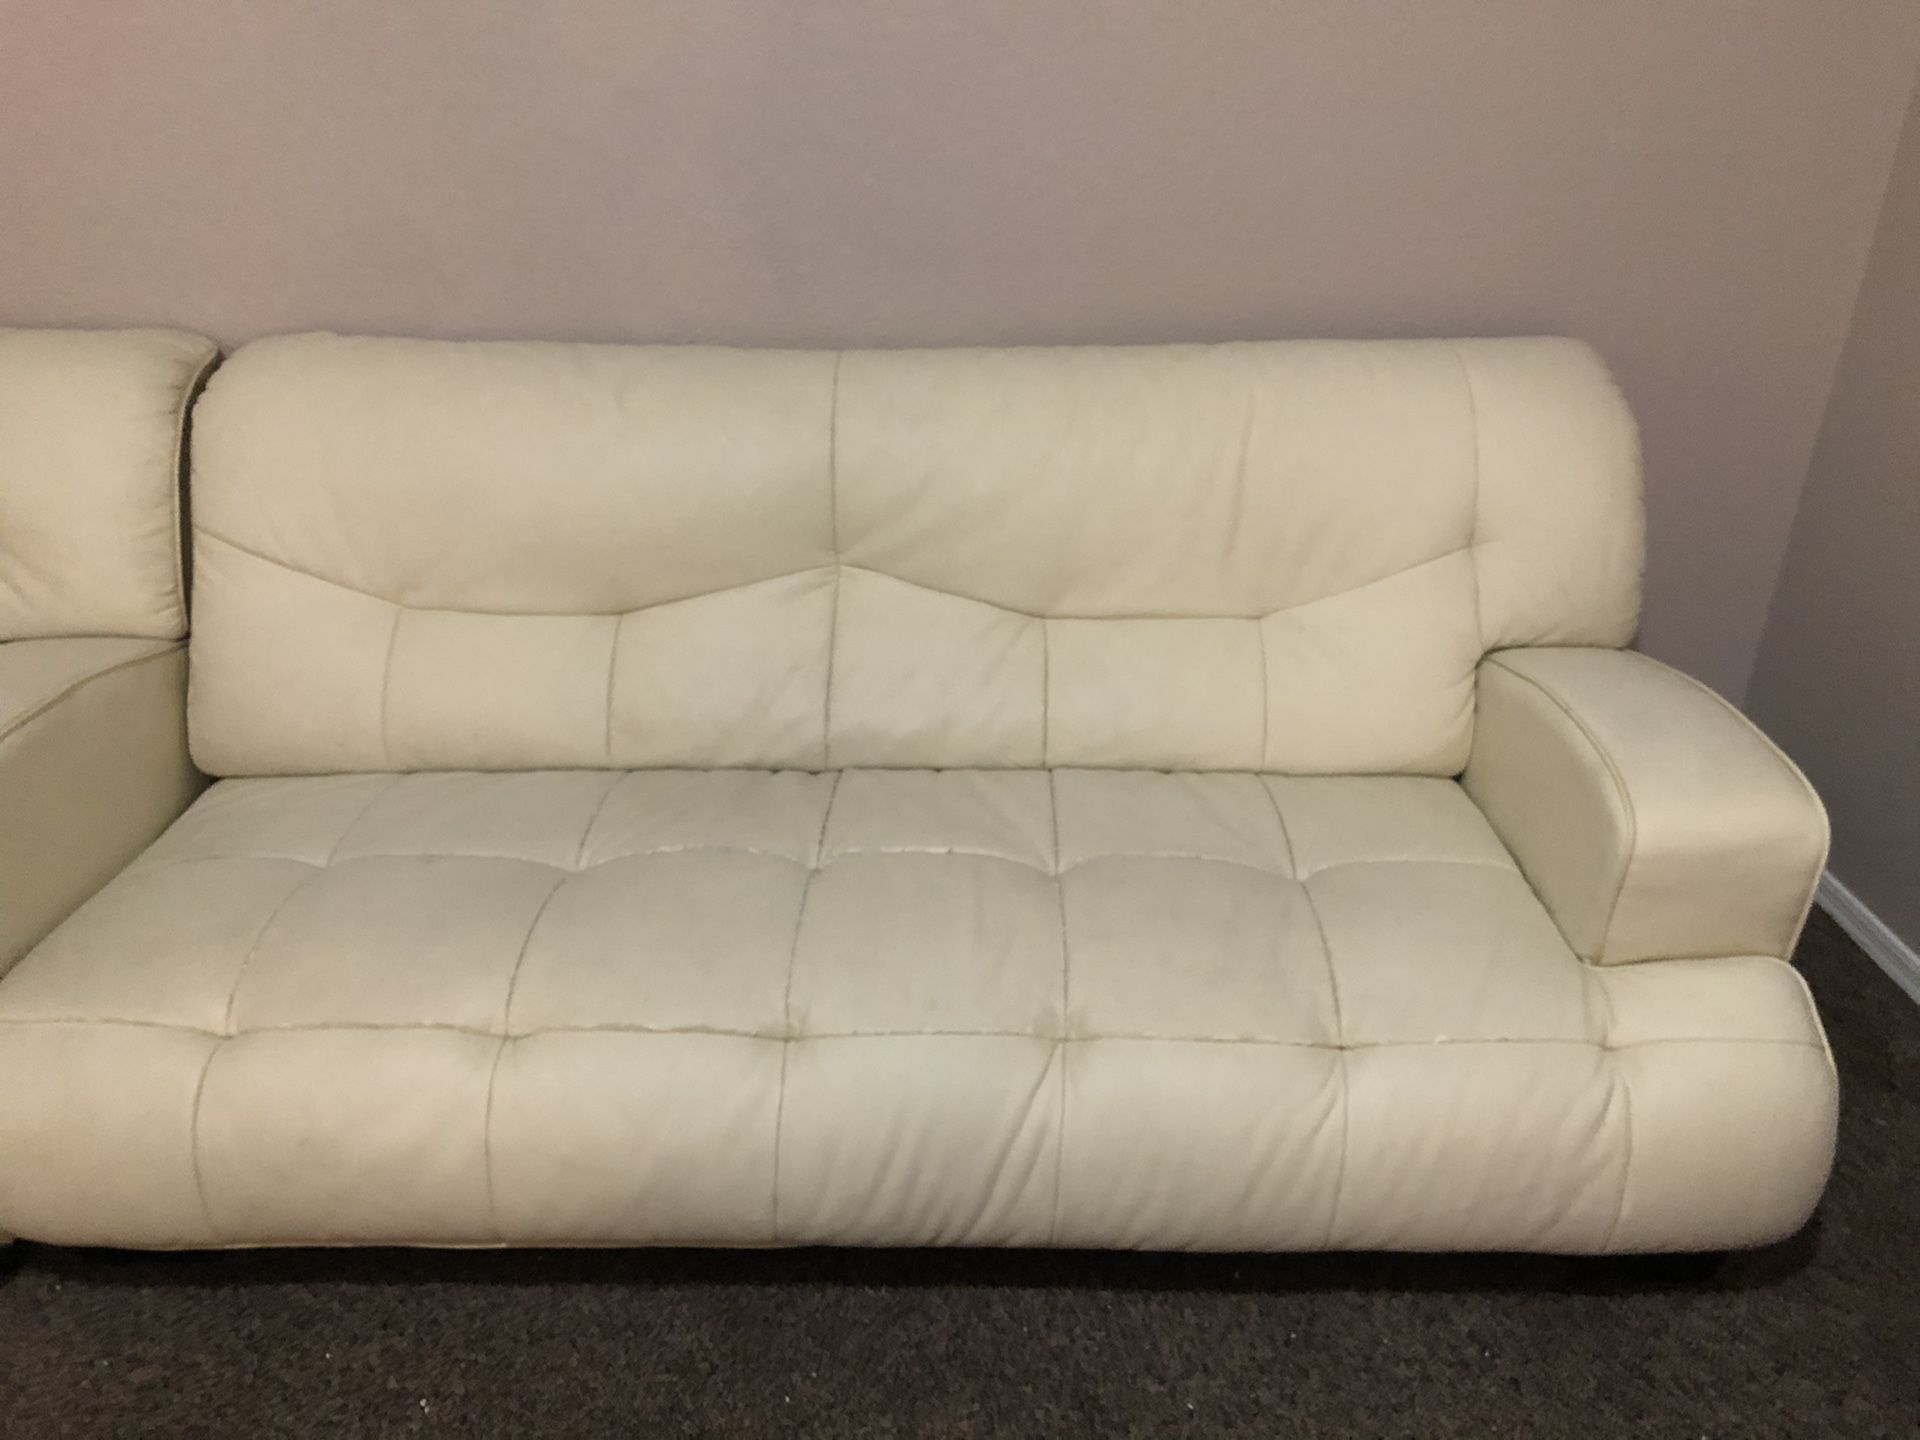 white leather couch set WOW $50